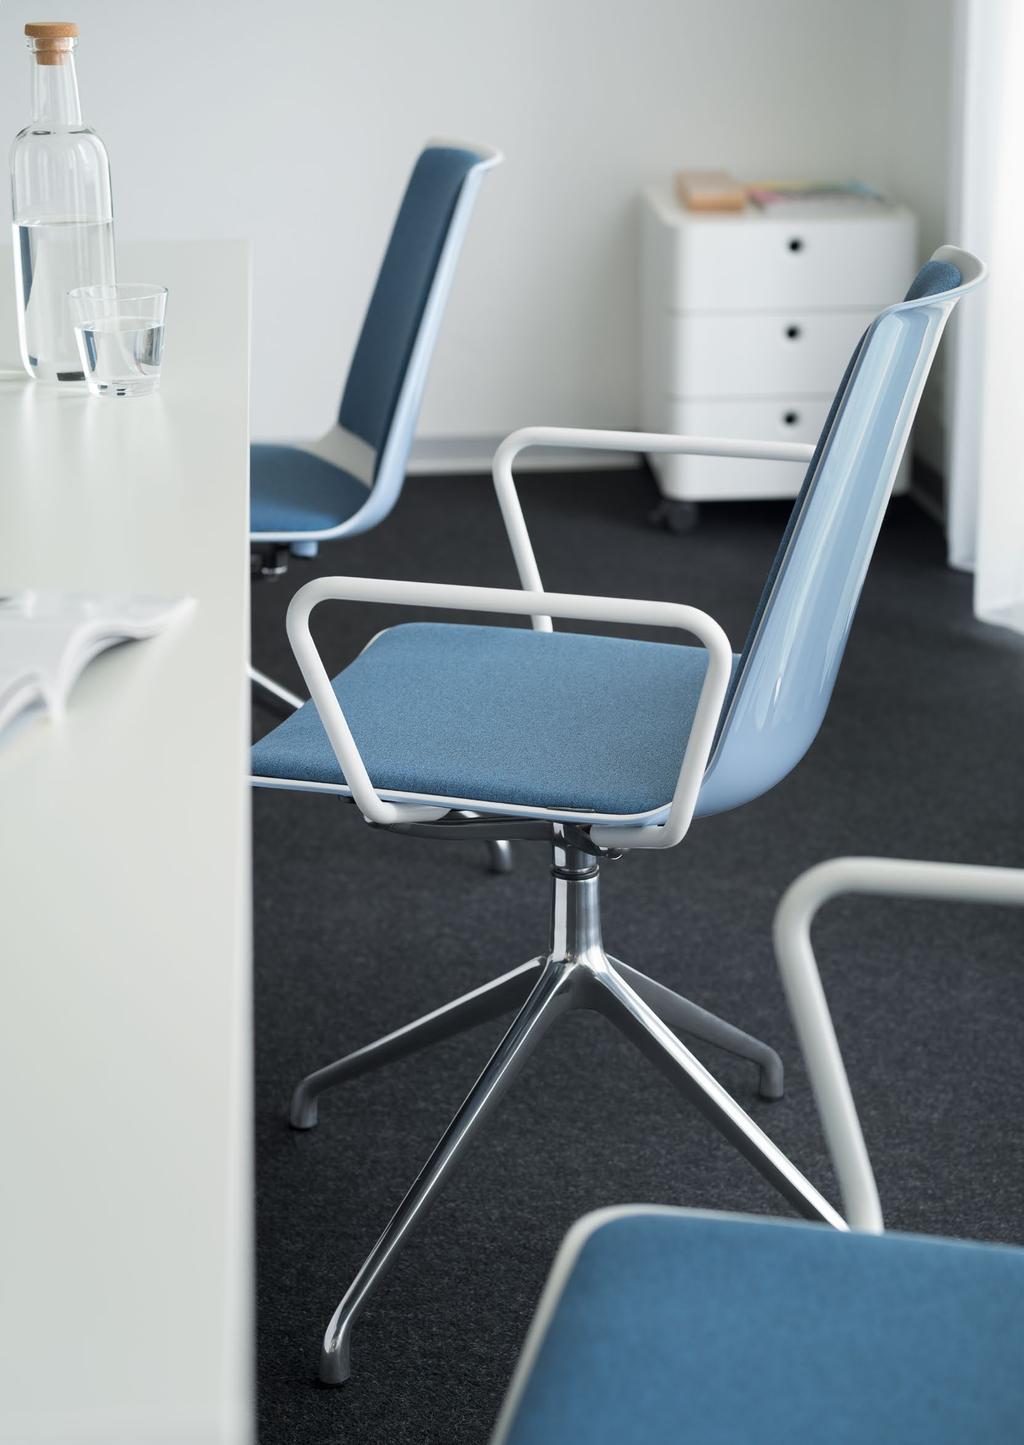 Flexible and comfortable: the conference chair.